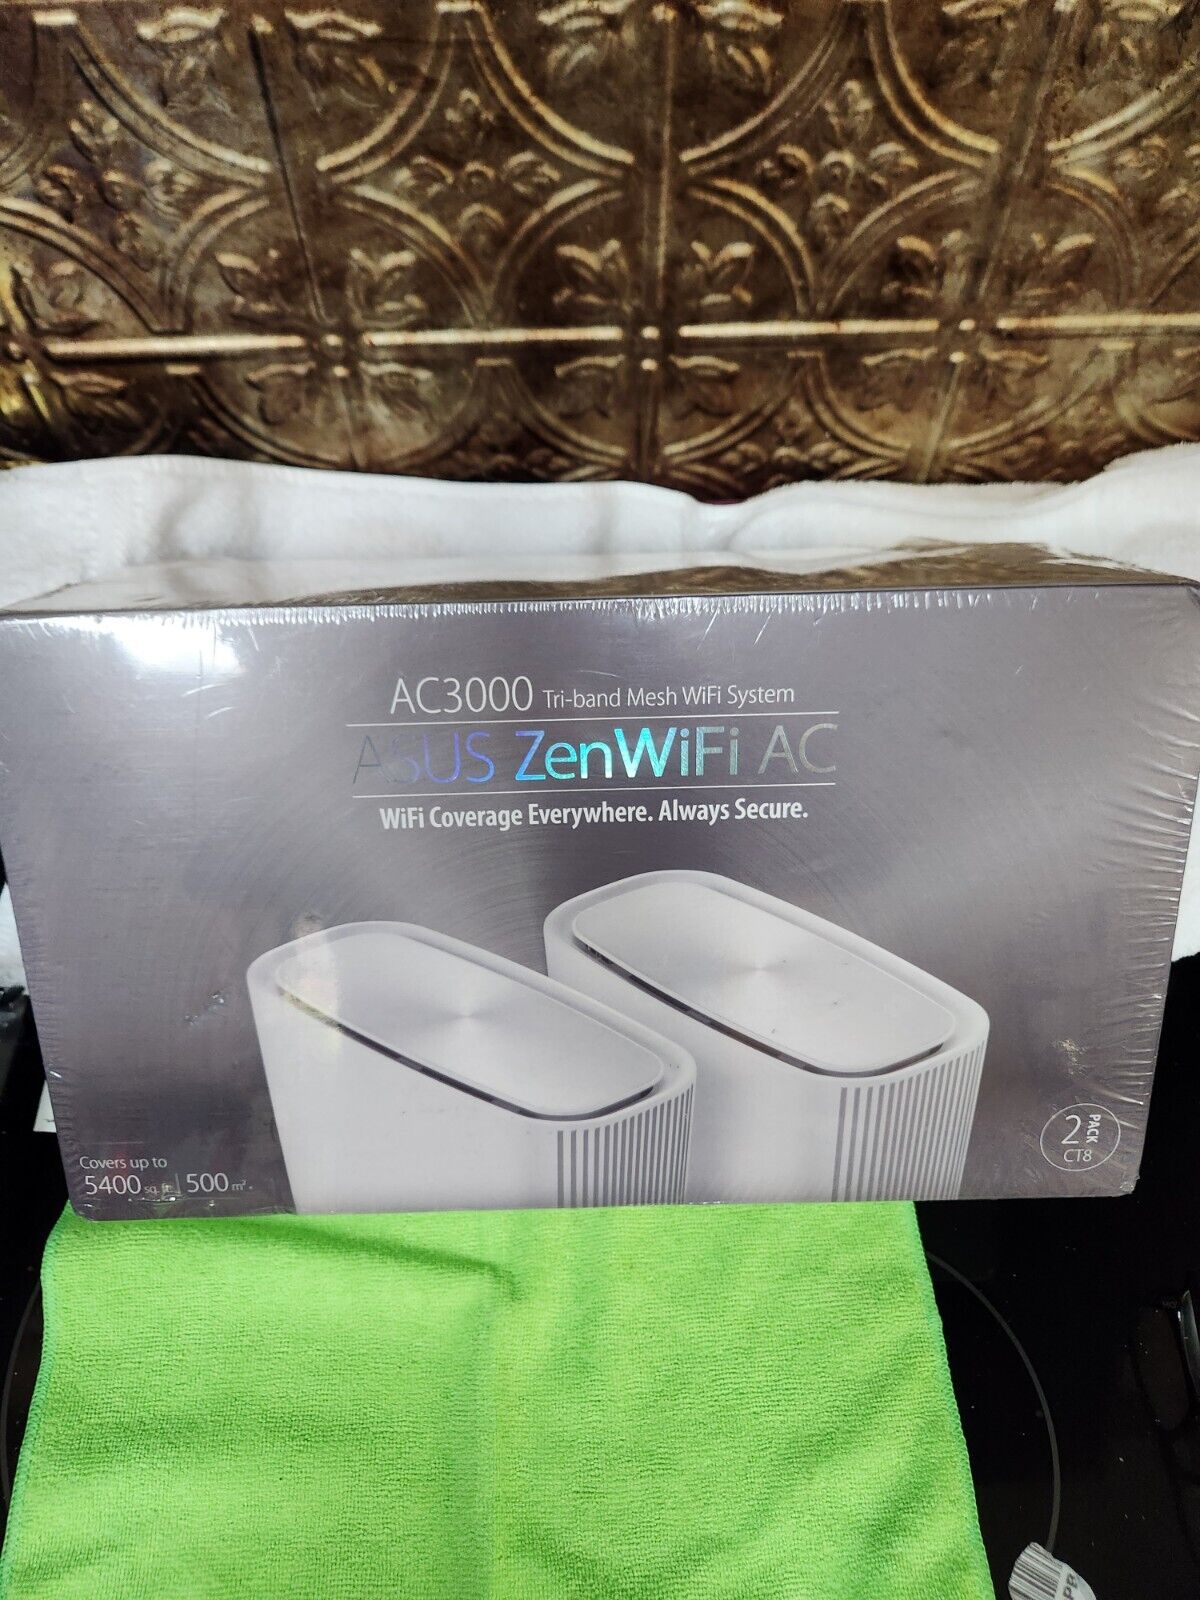 Asus Zenwifi Ac Whole Home Tri-Band 2 Pack CT8 AC 3000 New Sealed White Nice